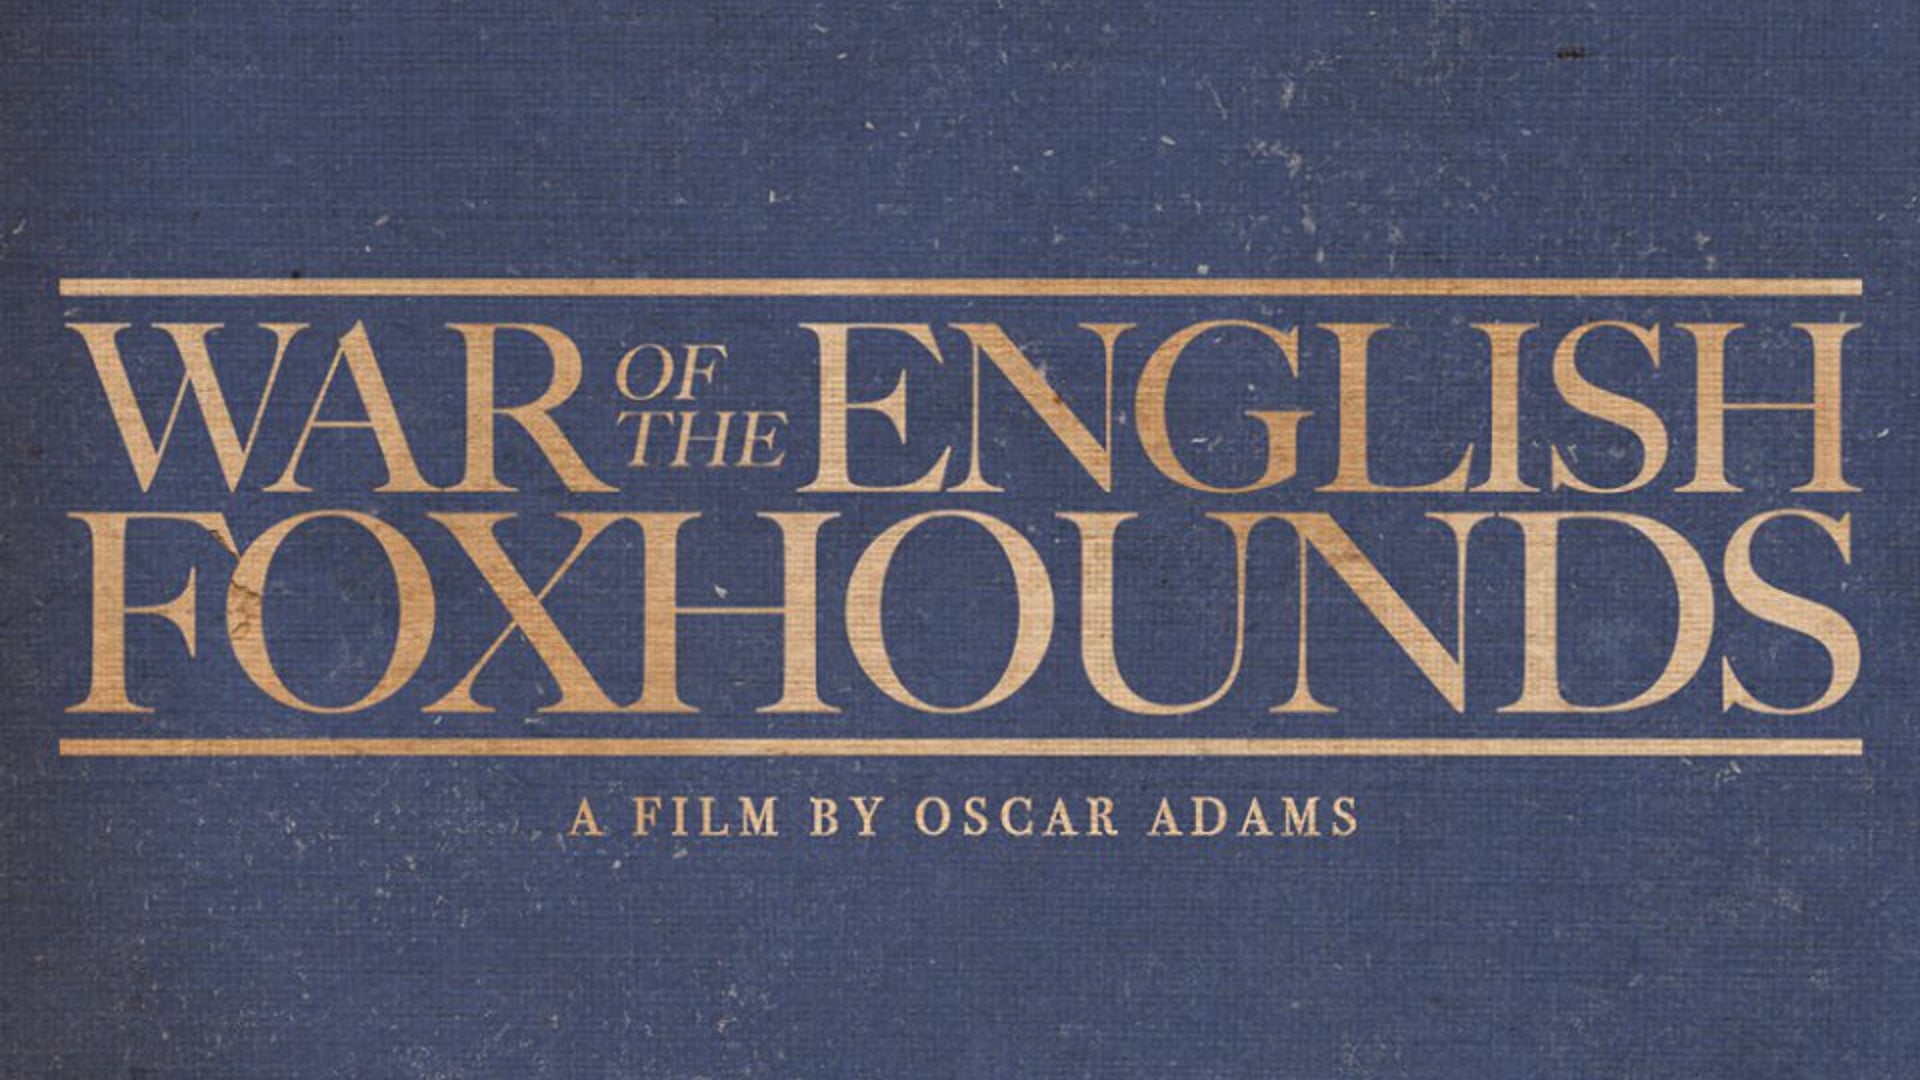 War of the English Foxhounds